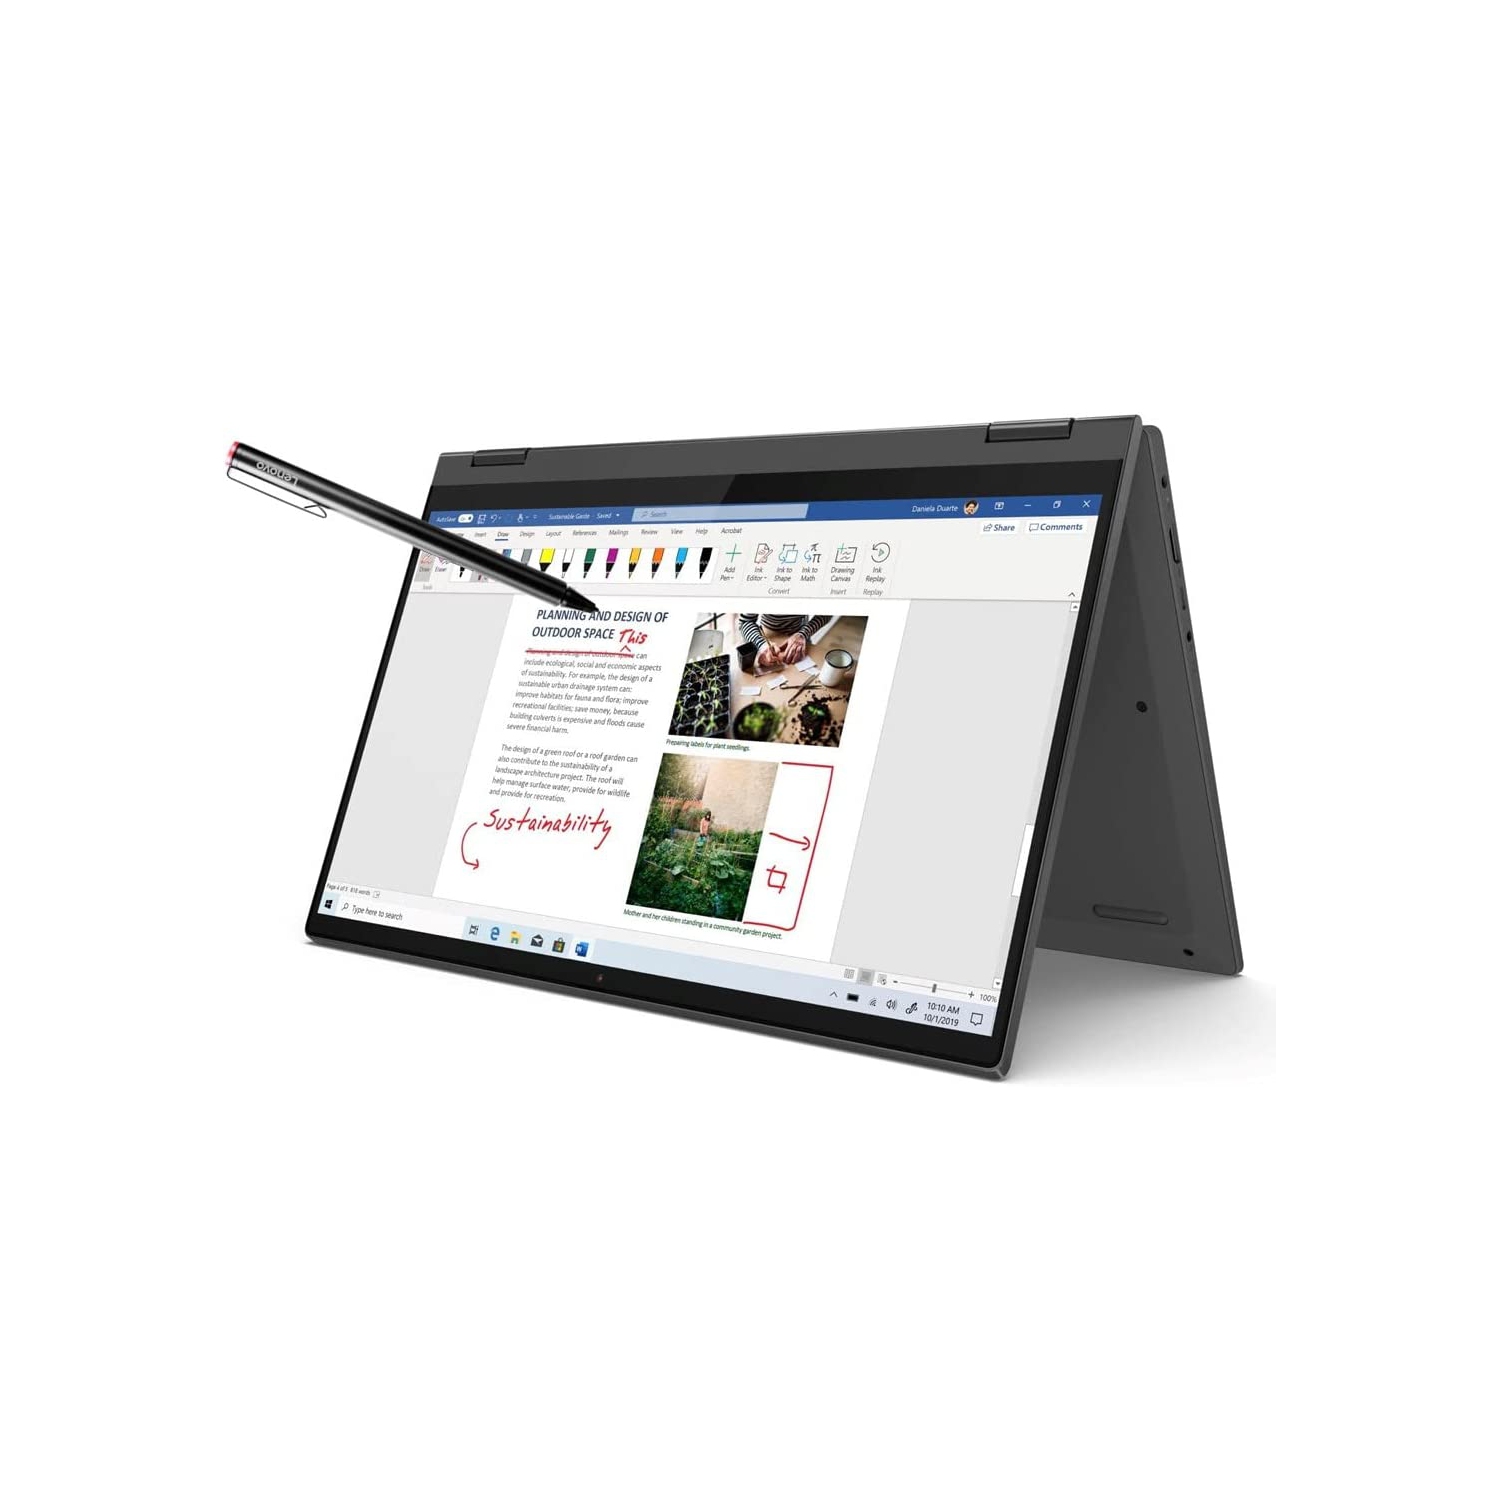 Refurbished (Excellent) - Lenovo Flex 5 14" 2-in-1 TouchScreen FHD Laptop (Intel Core i3-1115G4, 8GB RAM, 256GB SSD, Windows 11) Factory Refurbished - Graphite Grey (82HS00R6US)